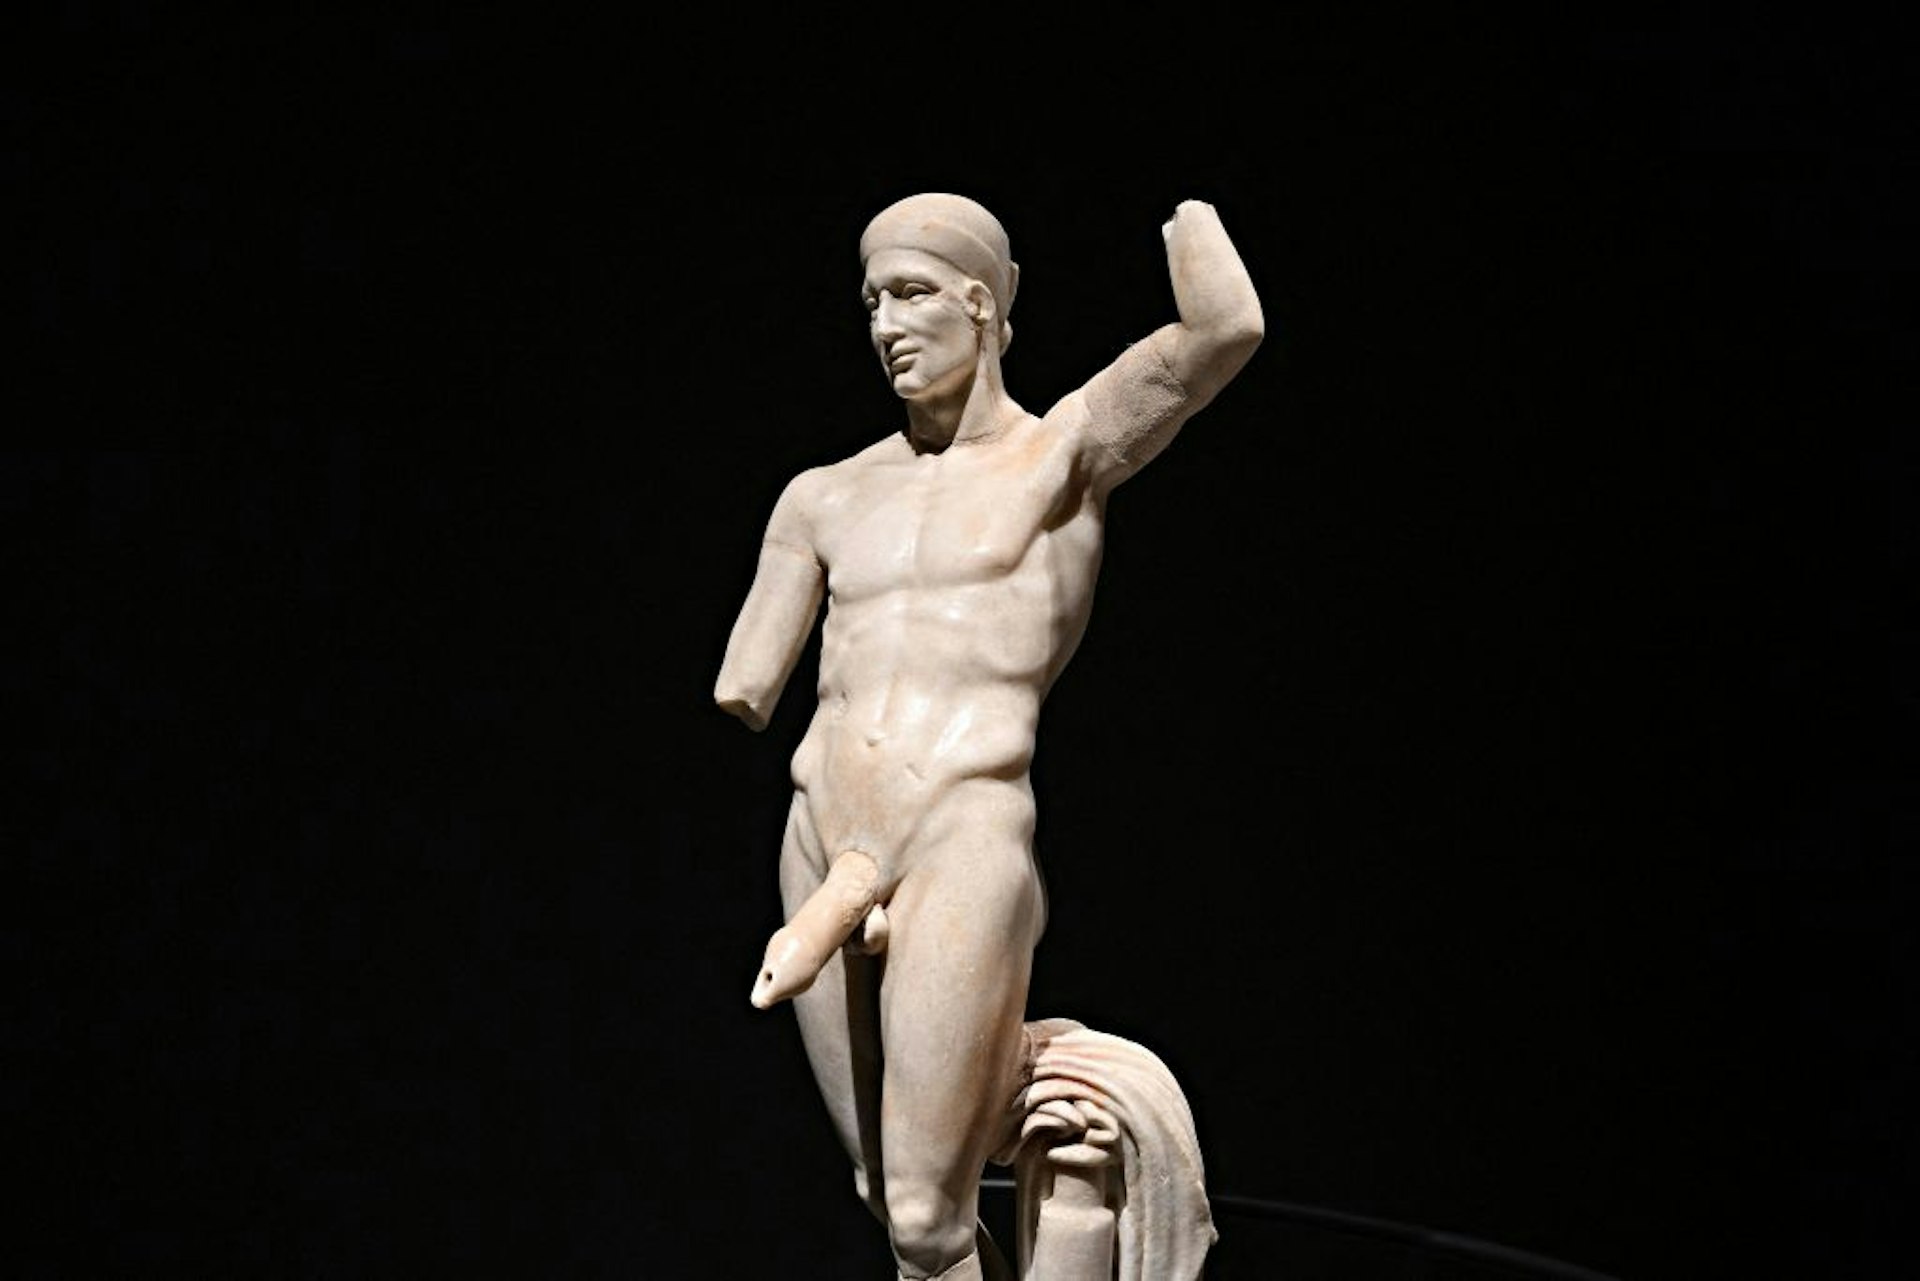 A "Statue-fountain of Priapus, symbol of prosperity" with a huge penis against a black background during a new exhibition in Pompeii's site entitled "Art and sensuality in the houses of Pompeii" on art and sexuality in the ancient city, where sculptures and paintings of breasts